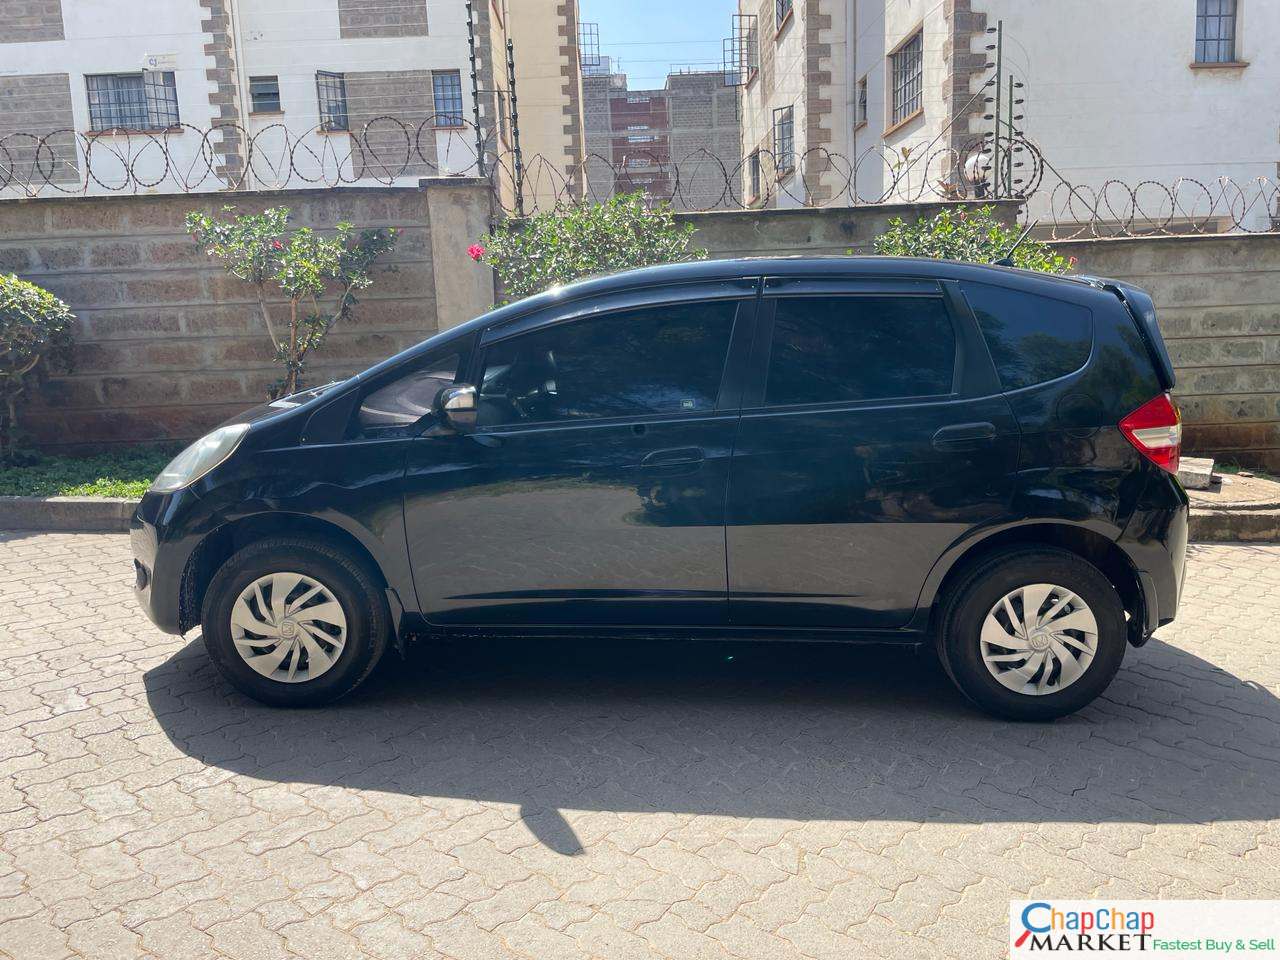 Cars Cars For Sale-HONDA FIT QUICK SALE for sale in Kenya You Pay 30% deposit Trade in Ok hire purchase installments EXCLUSIVE 9